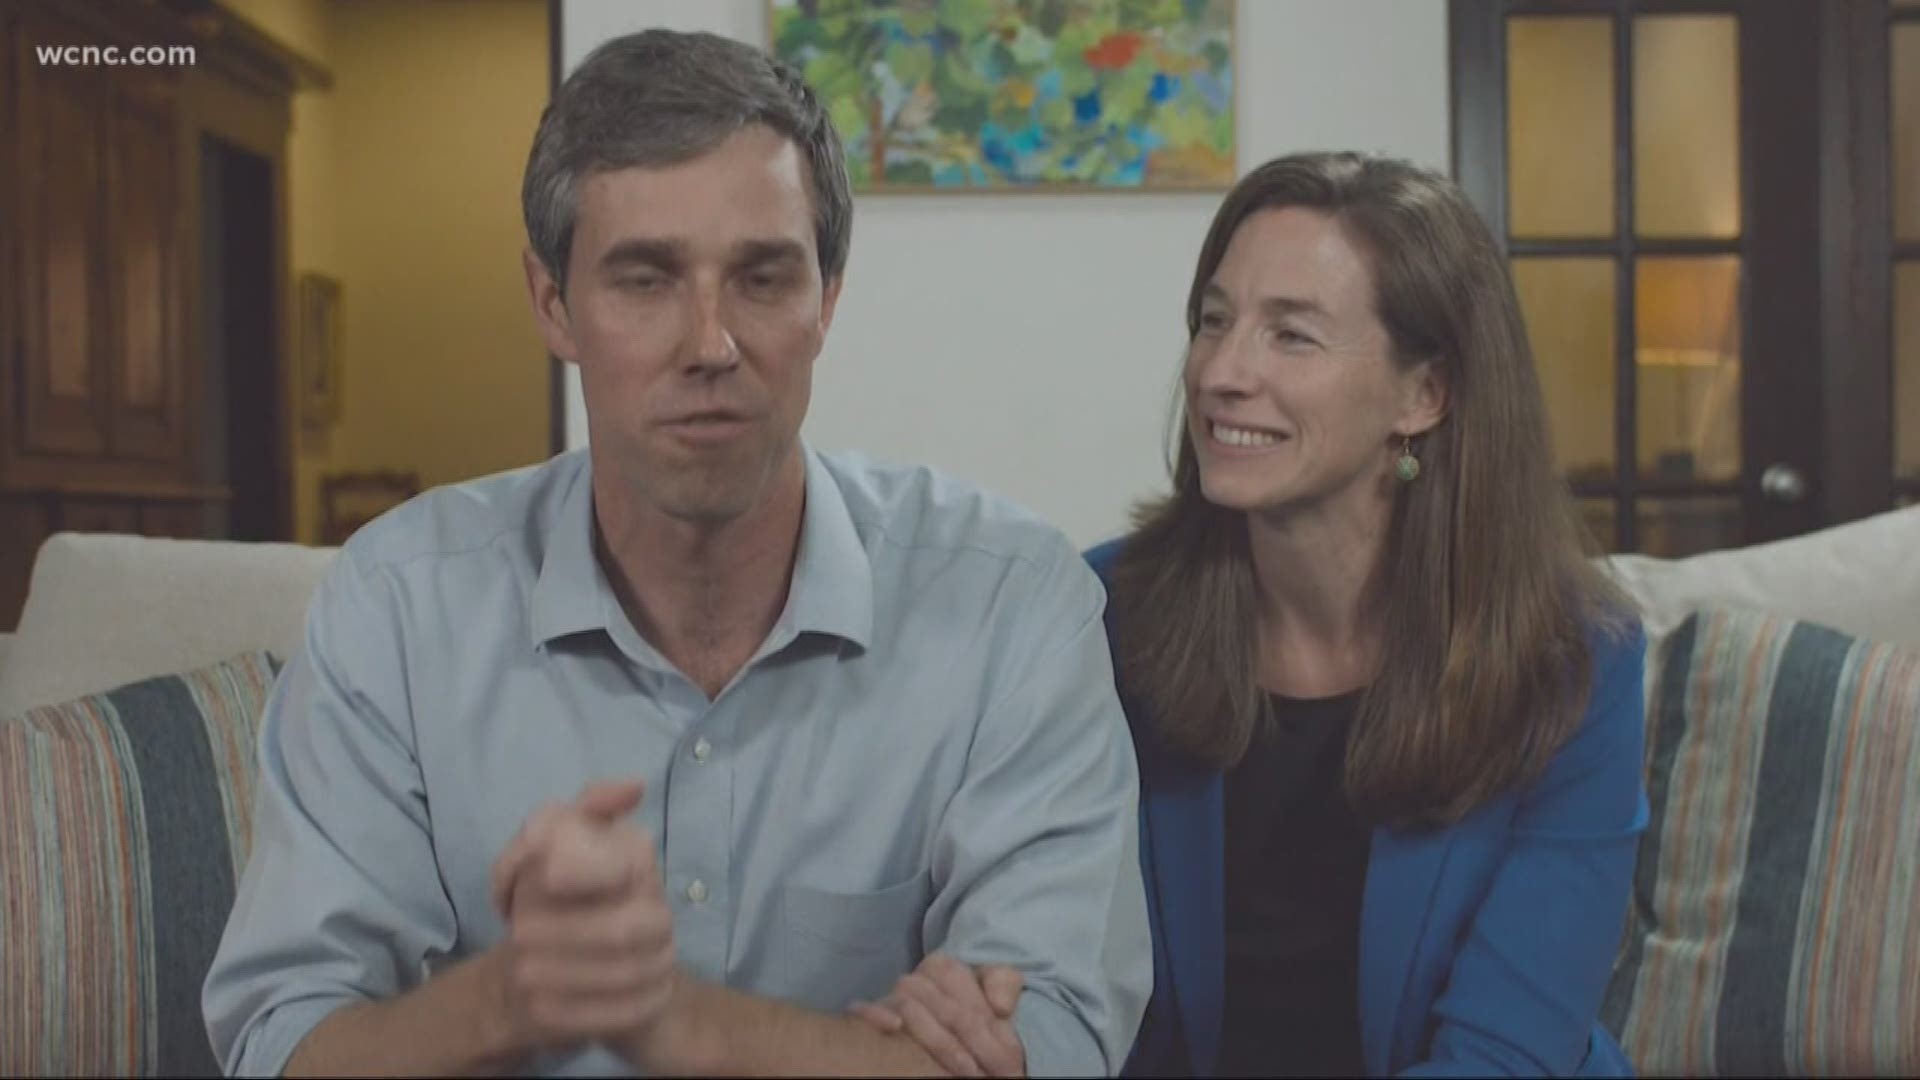 Former Texas congressman Beto O'Rourke announced Thursday that he is throwing his name in the hat and will run for president in 2020. "This is a defining moment of truth for this country and for every single one of us," O'Rourke said.